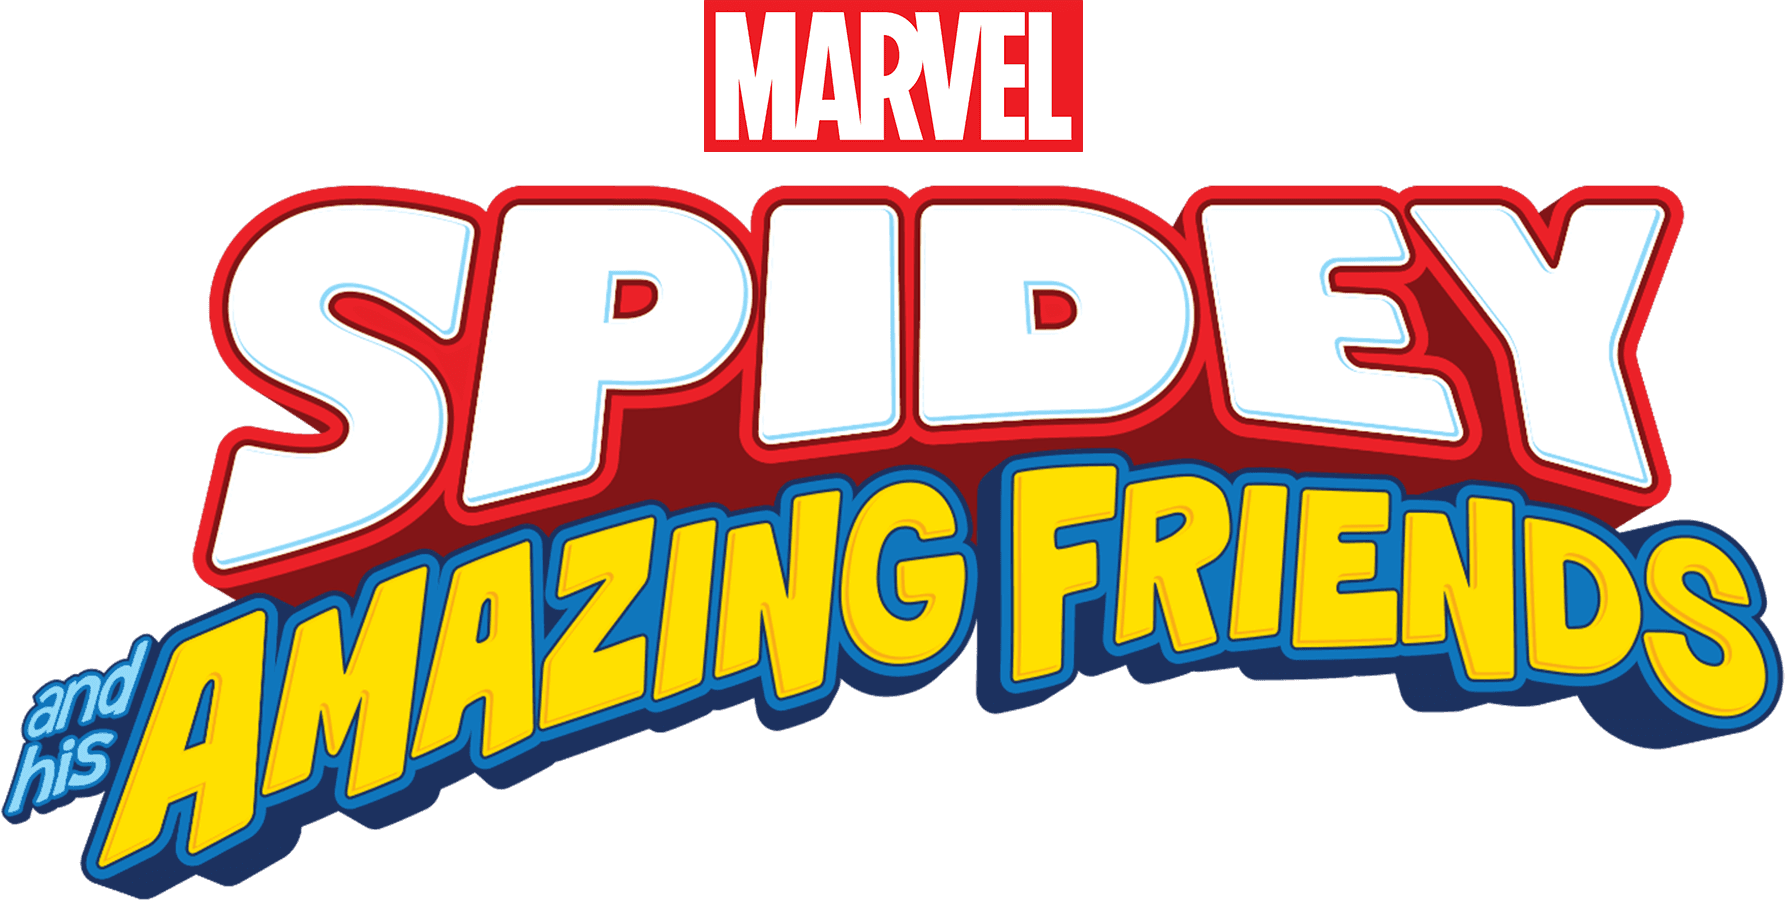 Marvel's Spidey and His Amazing Friends logo